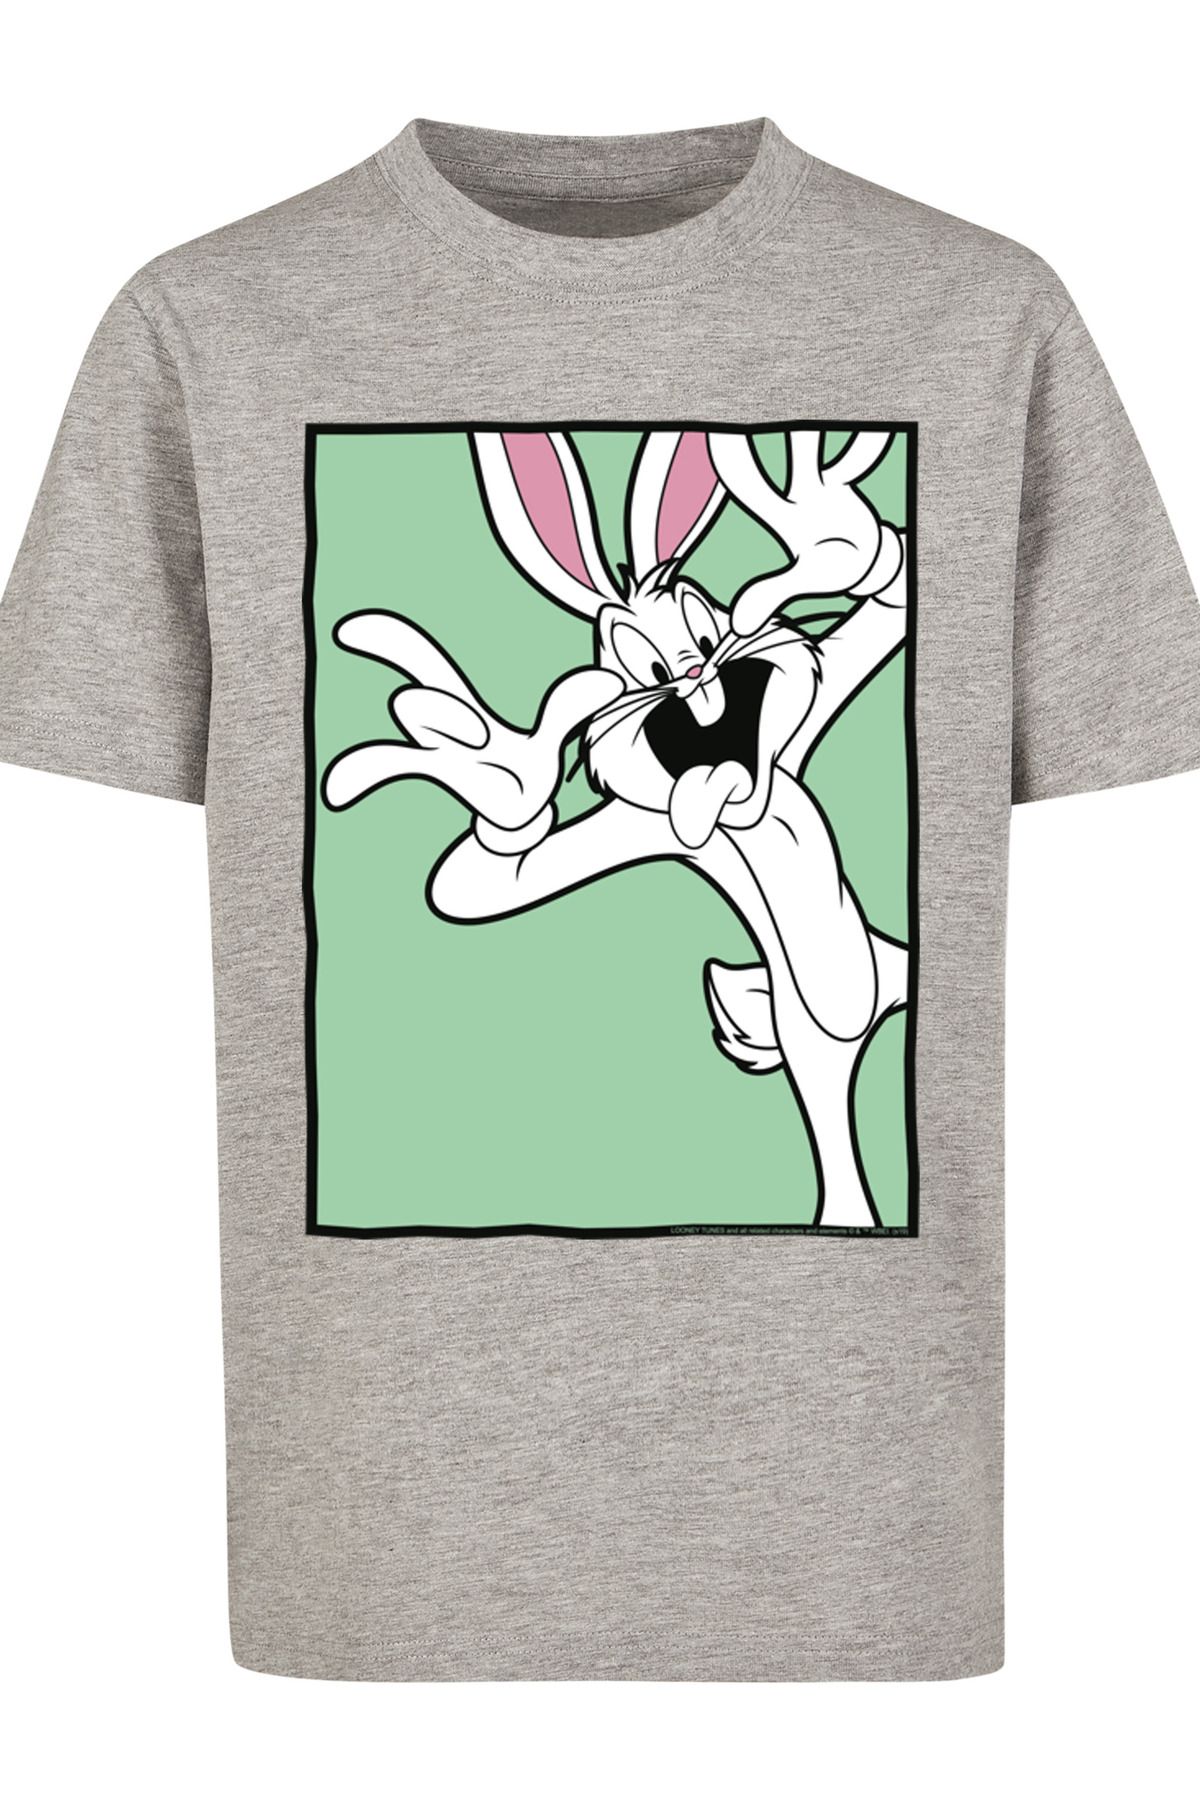 F4NT4STIC Kinder Kids - T- Basic Tunes Face-WHT Funny Bugs mit Bunny Trendyol Shirt Looney